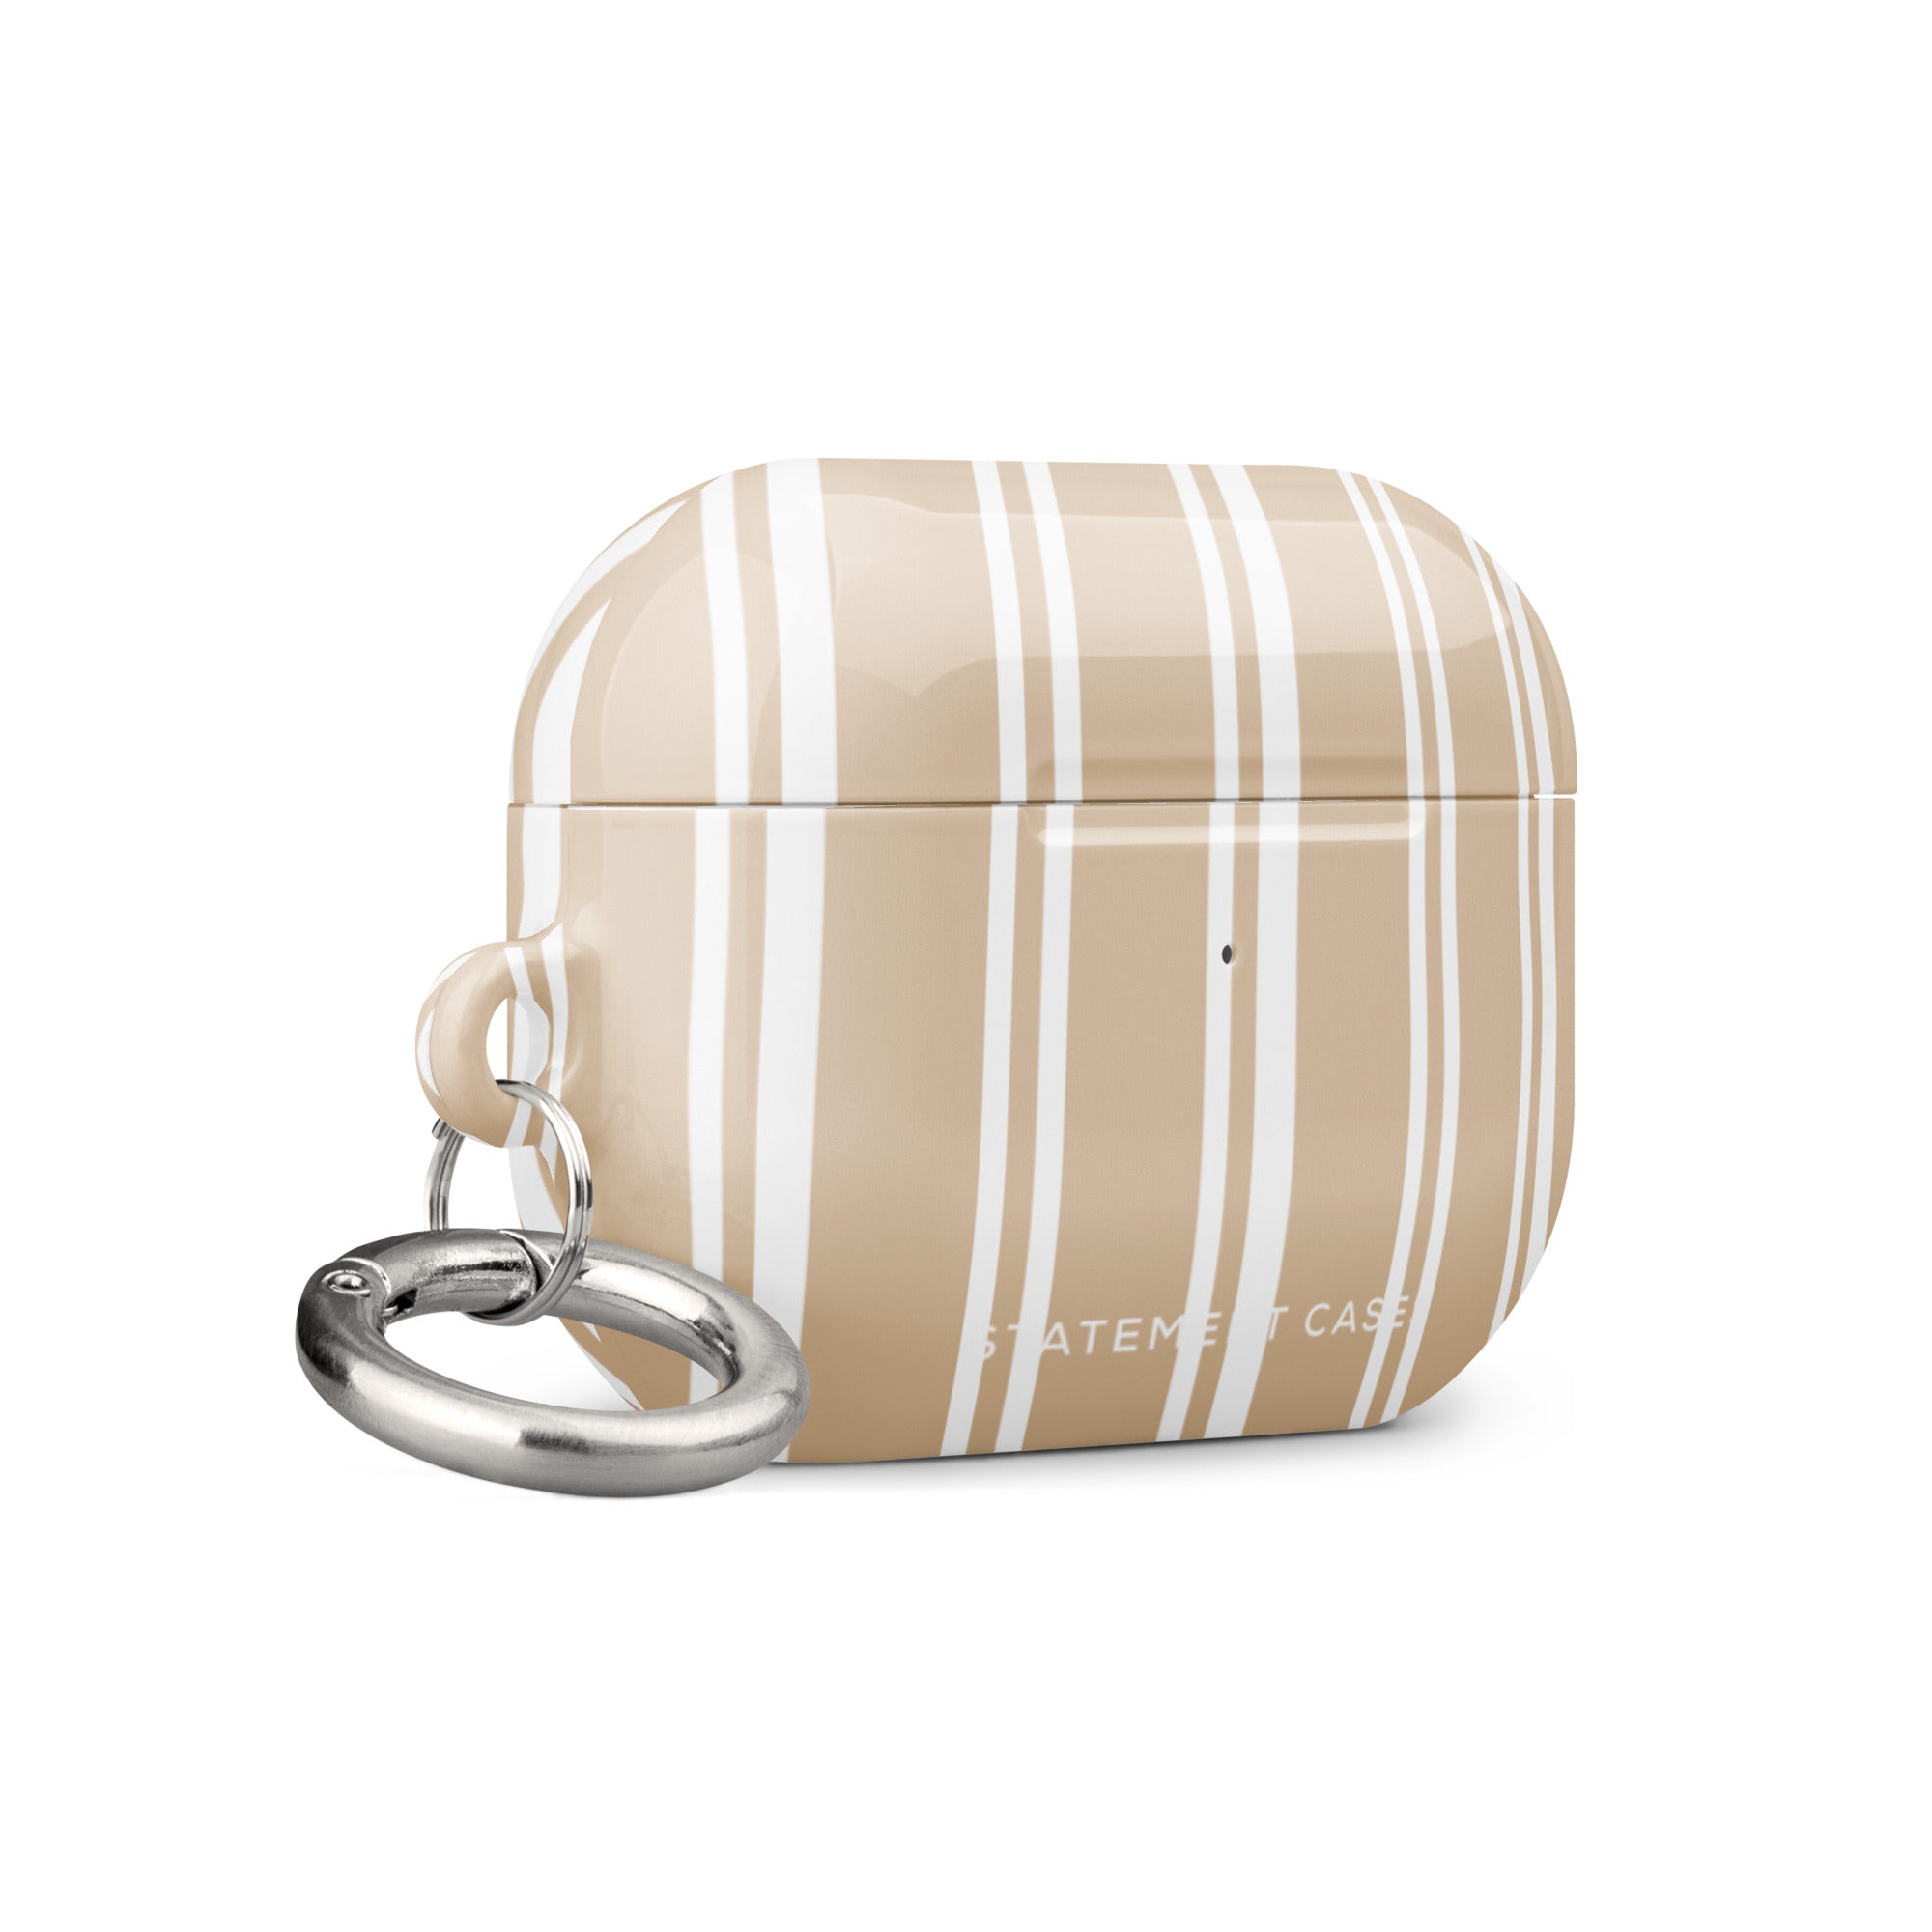 A beige Estate Stripe for AirPods Pro Gen 2 by Statement Cases with vertical white stripes is shown. It has a metal carabiner attached to the left side, enhancing convenience and durability. The impact-absorbing case displays the text "STATEMENT CASE" on the front.